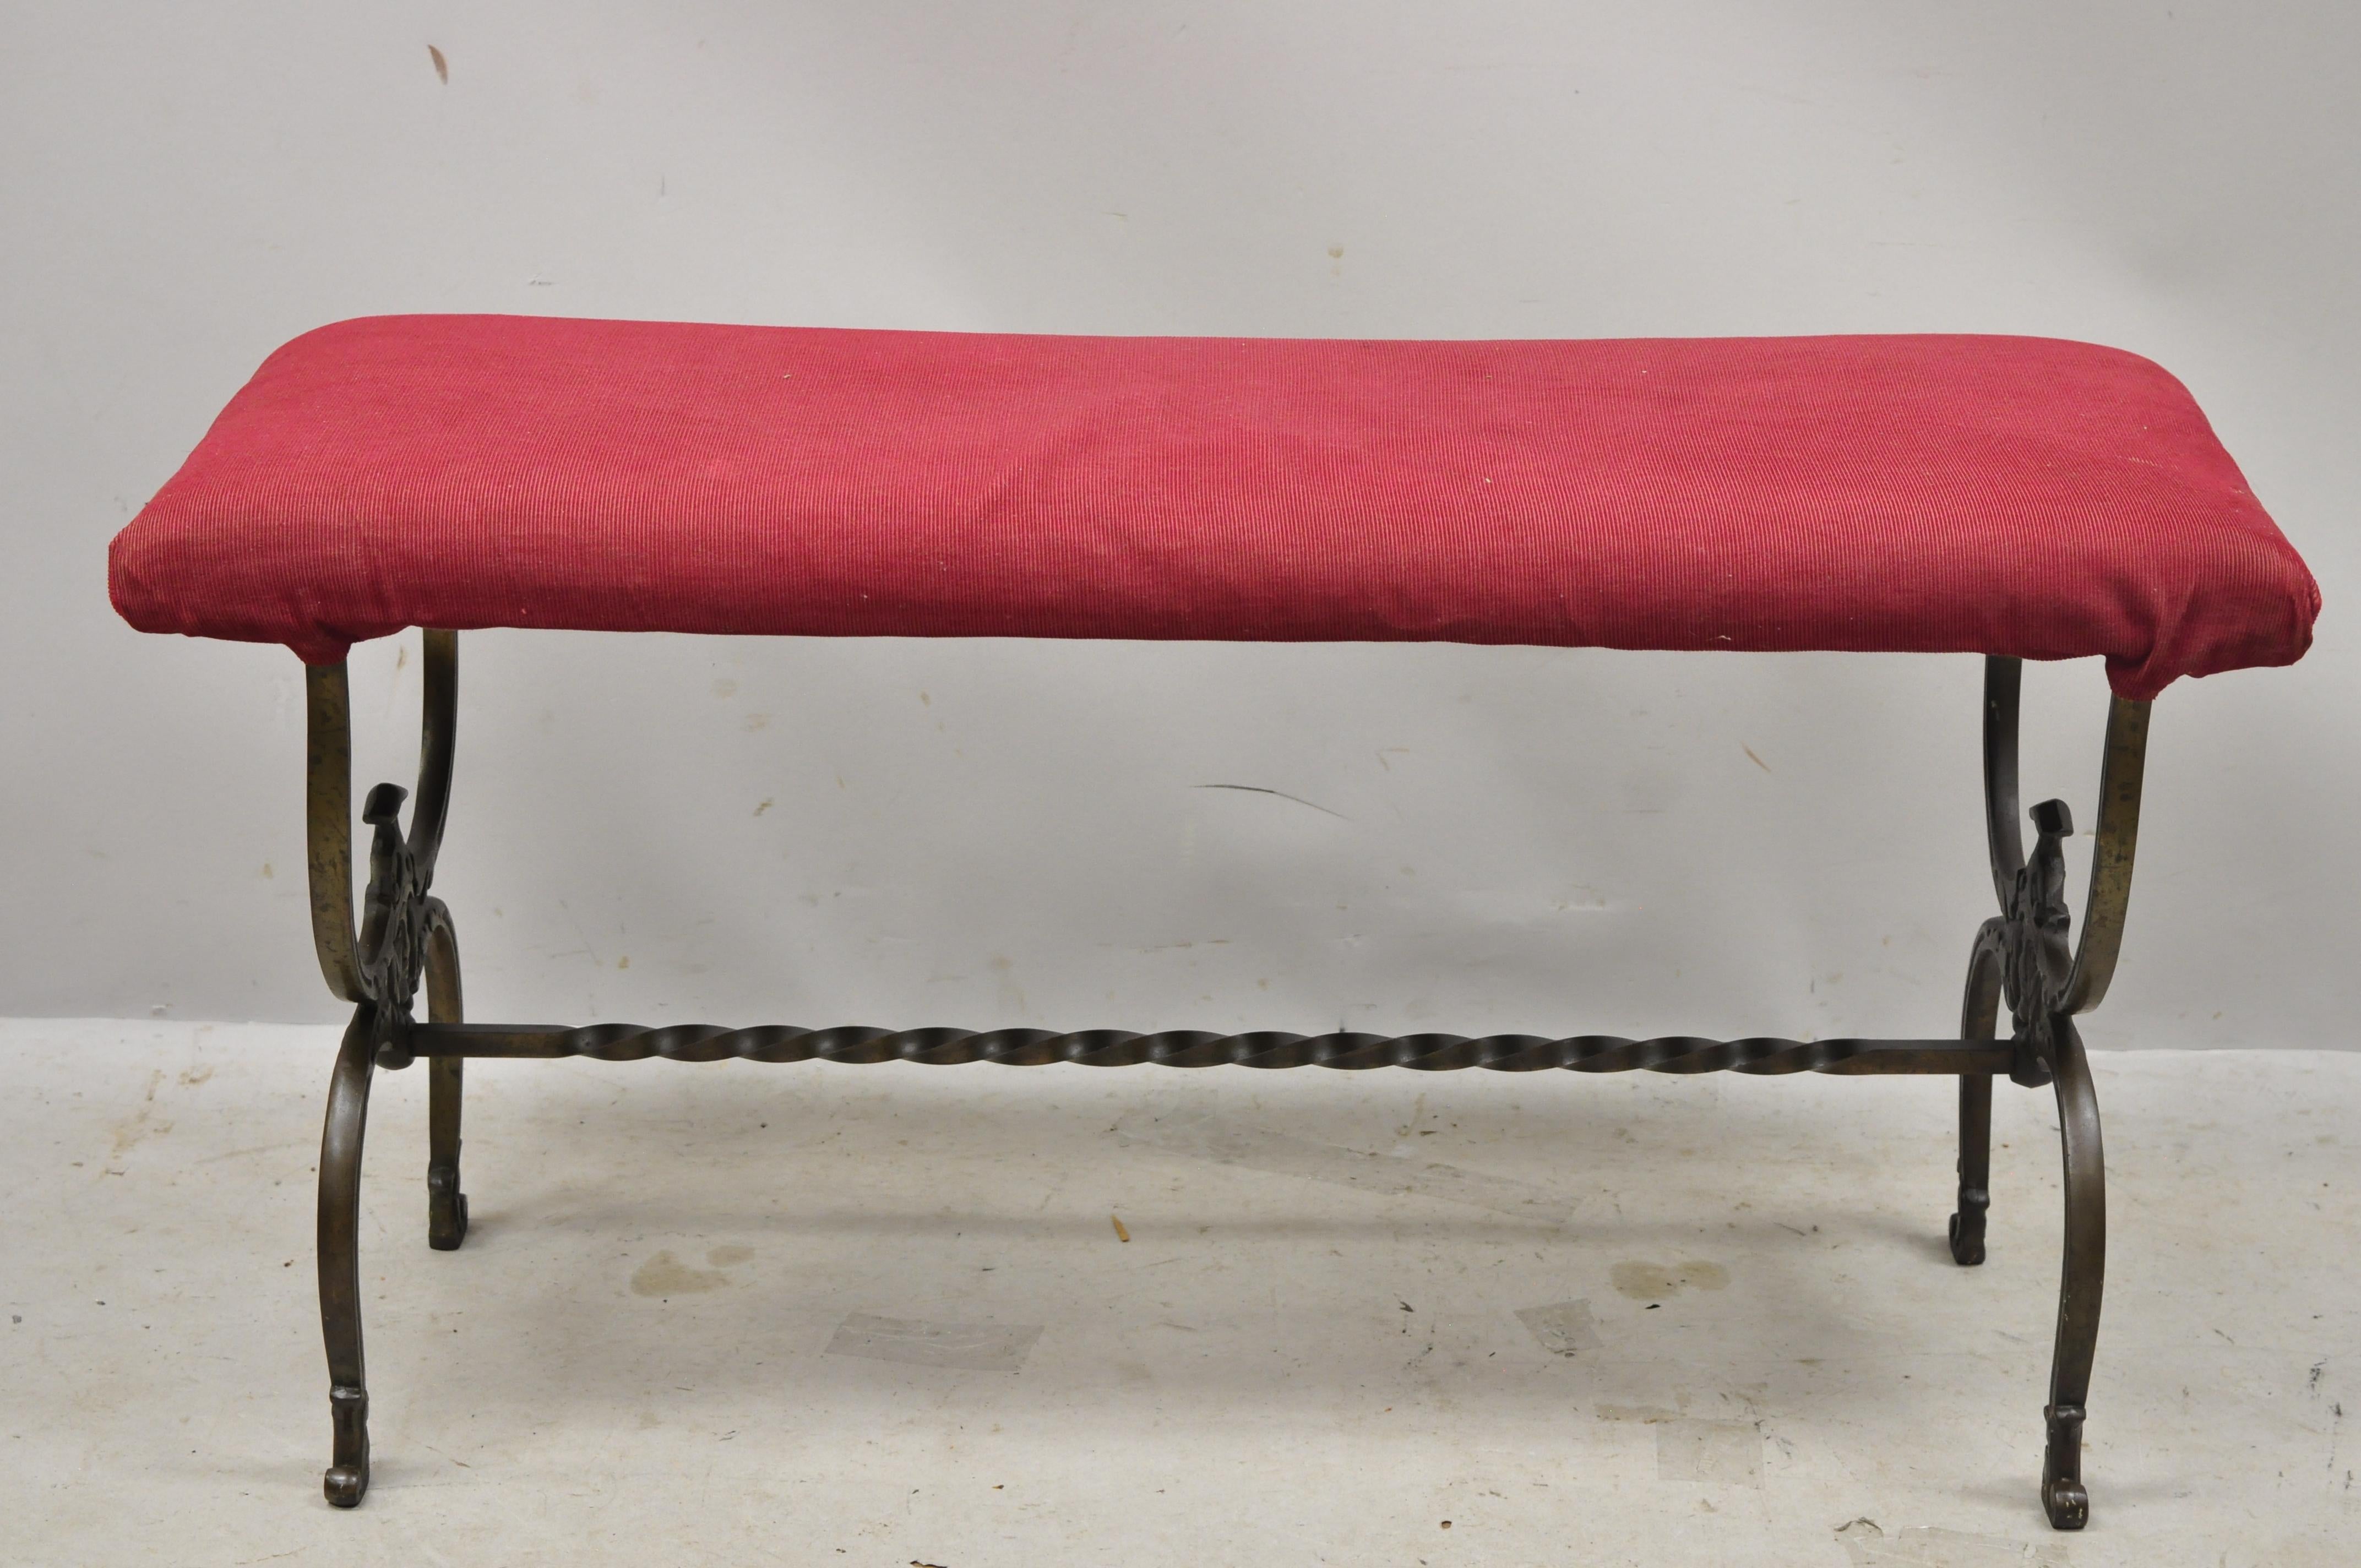 Antique Victorian wrought iron figural bench with faces and twisted stretcher. Item features figural faces to base, spiral stretcher, wrought iron construction, upholstered seat, very nice antique item, circa late 19th century. Measurements: 18